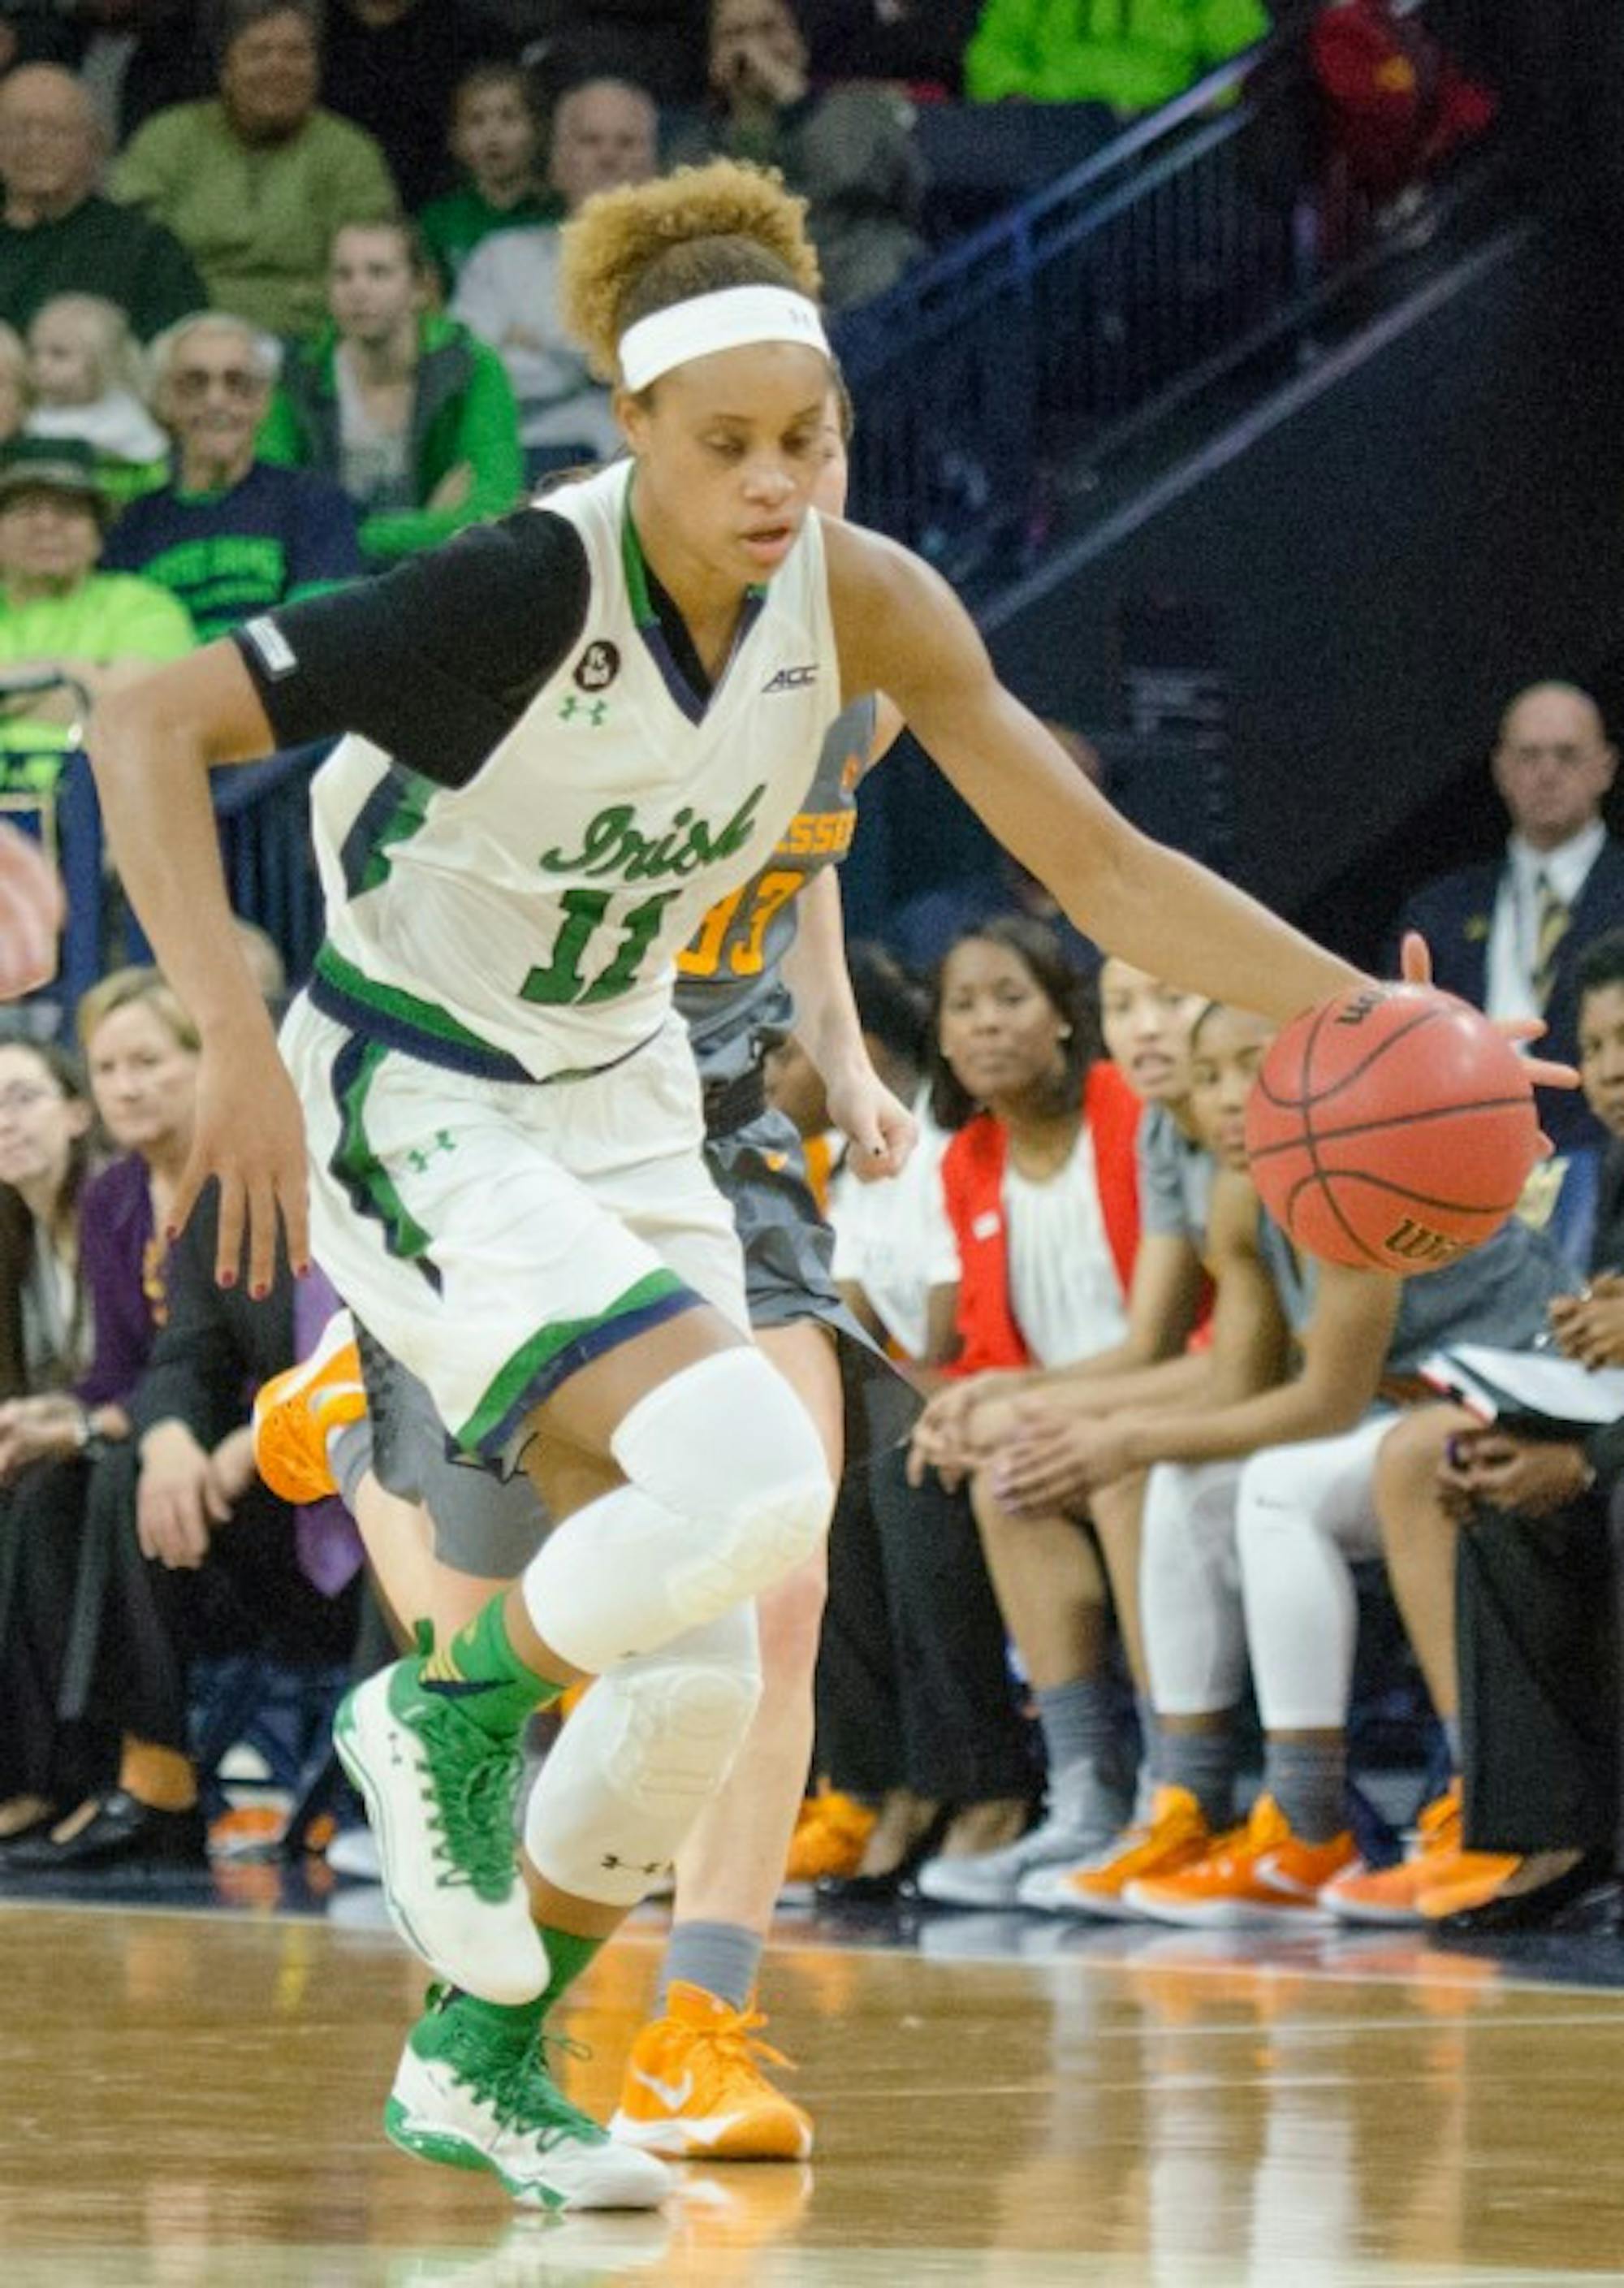 Irish sophomore forward Brianna Turner dribbles upcourt in Notre Dame’s 79-66 win over Tennessee on Jan. 18 at Purcell Pavilion.